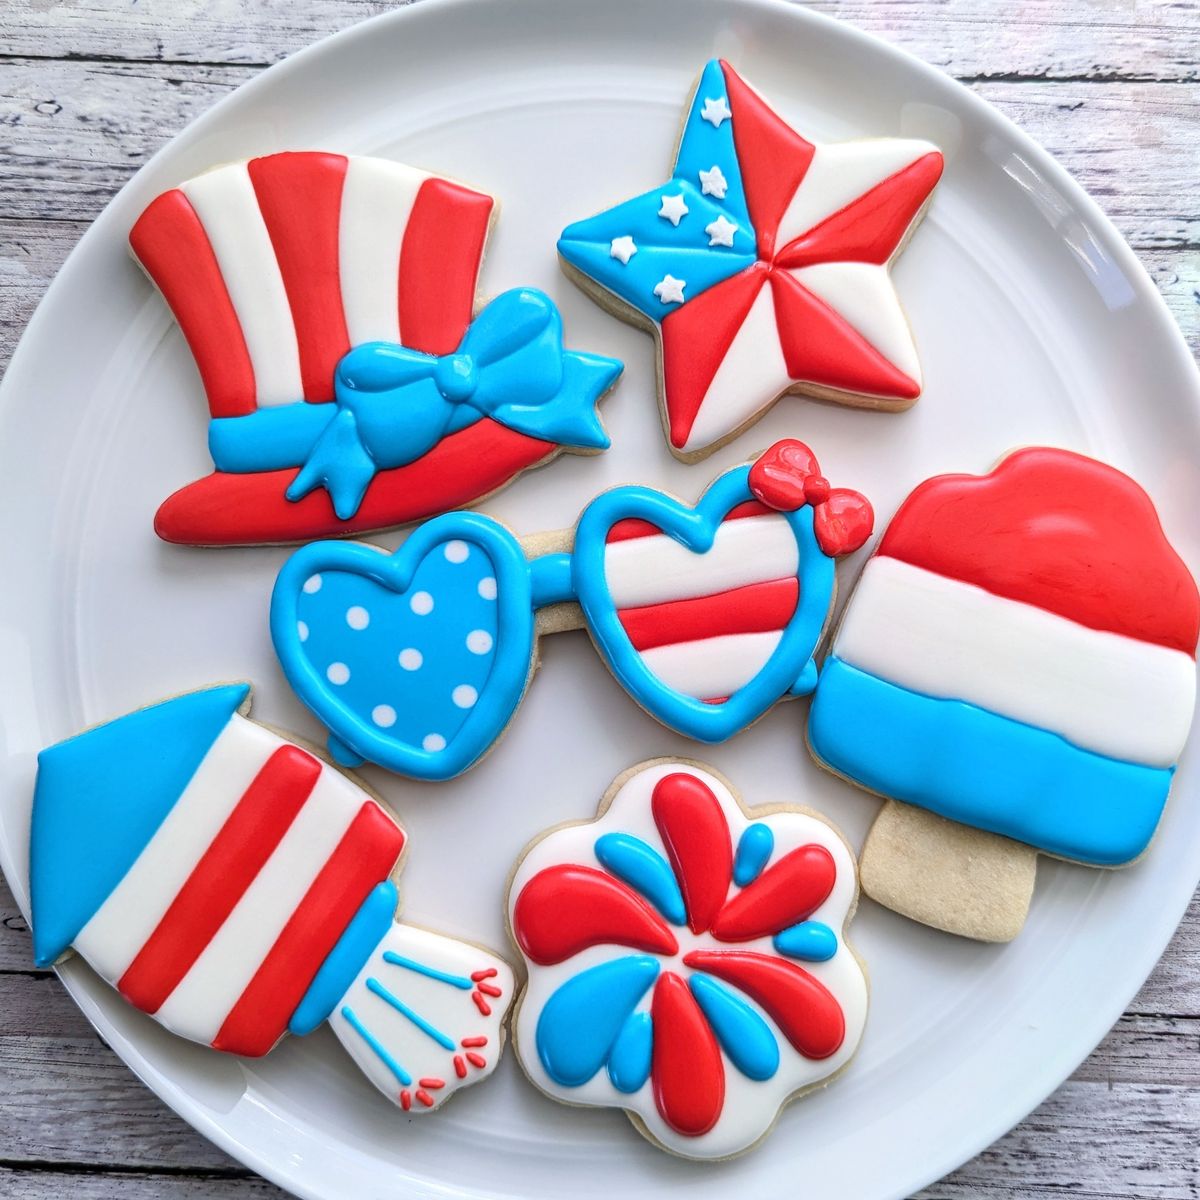 4th of July Cookie Decorating at Planks and Paint DIY Workshop